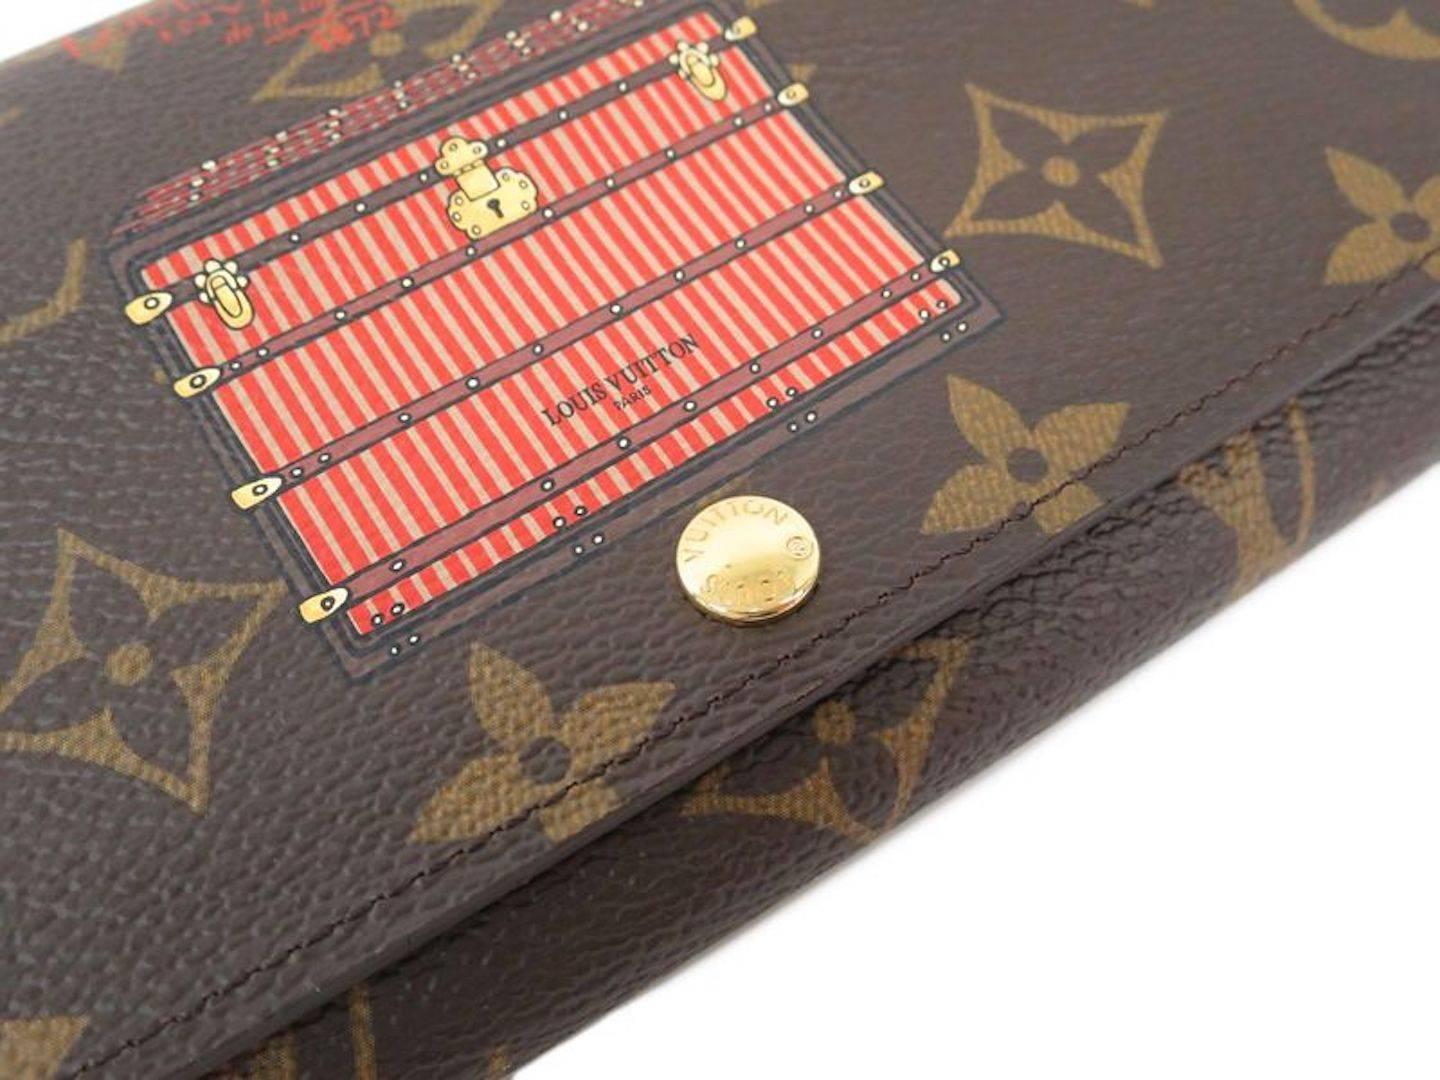 CURATOR'S NOTES

Monogram canvas
Gold hardware
Button closure
Made in Spain
Date code CA3163
Measures 7.5